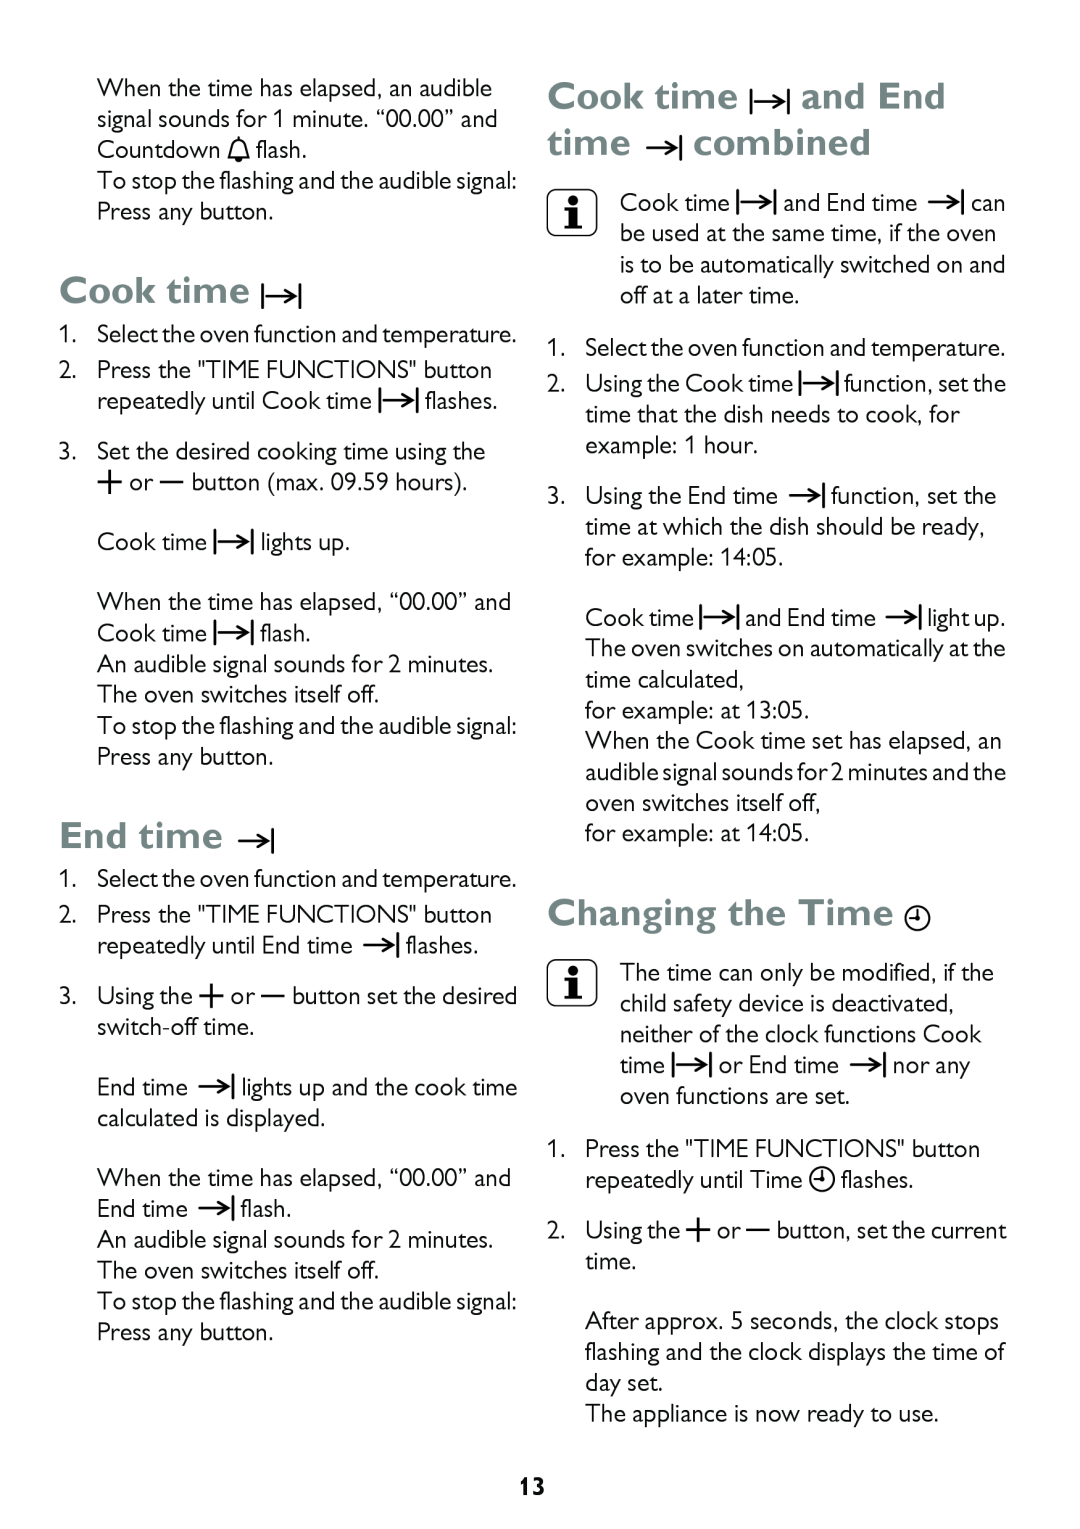 John Lewis JLBIDO913 instruction manual Cook time and End time combined, Changing the Time 